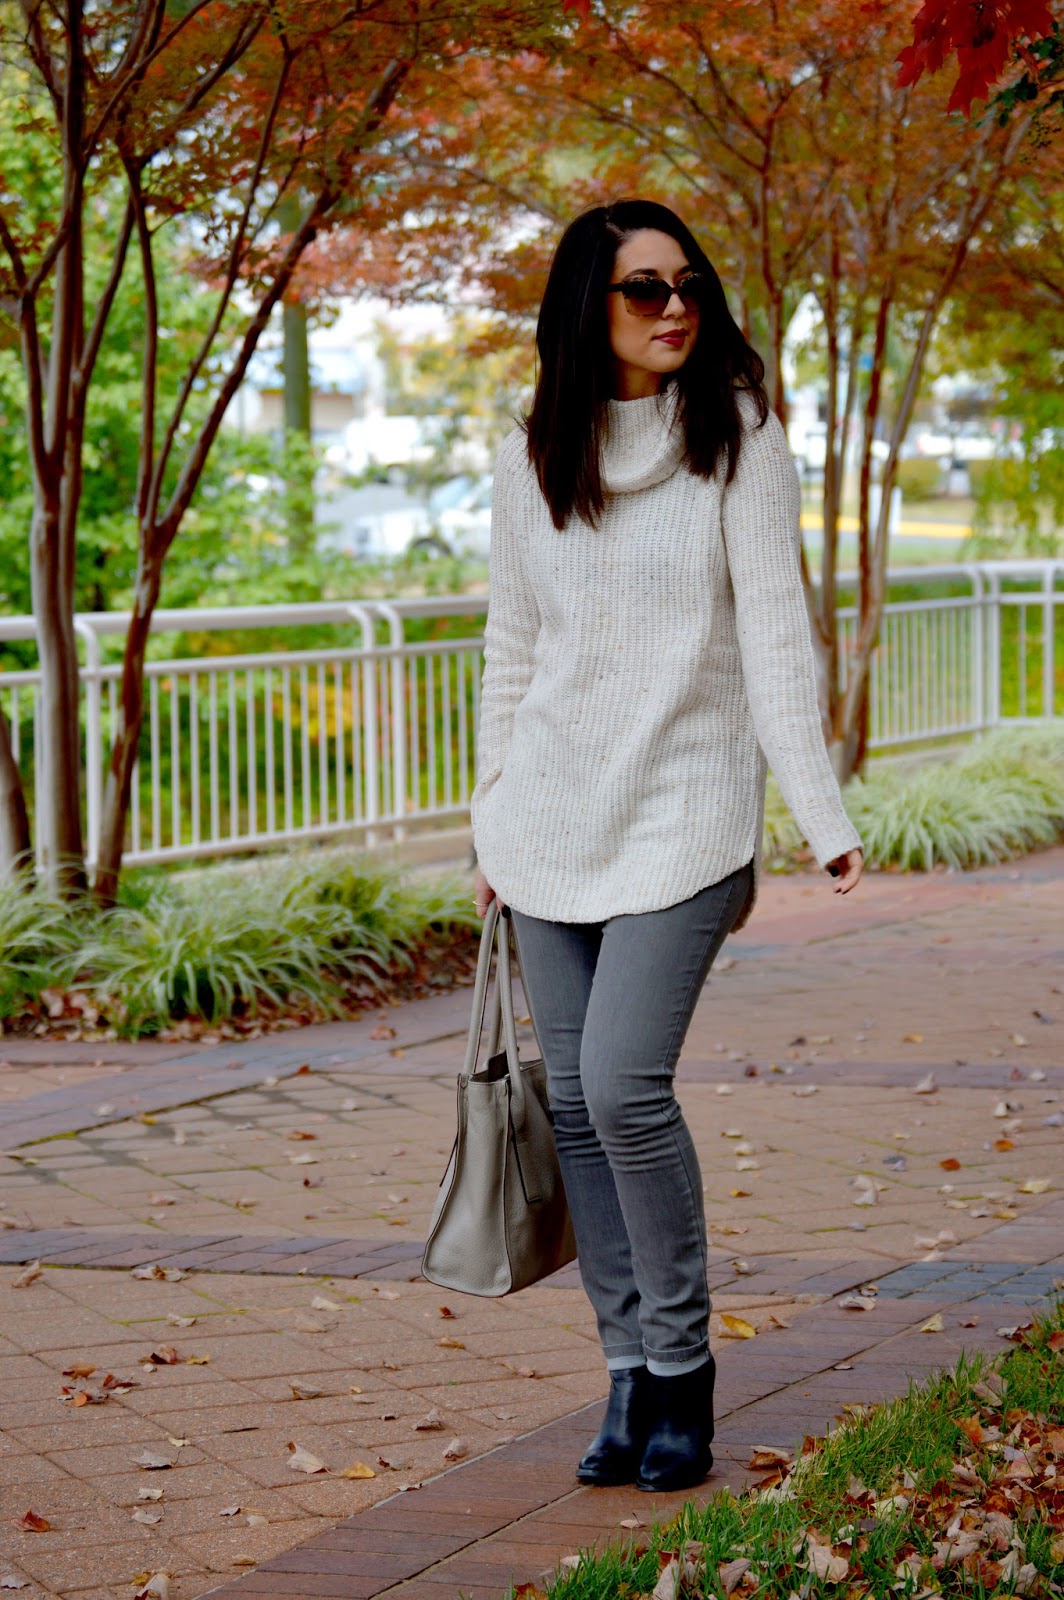 Rosy Outlook: Cozy Sweater & Grey Jeans